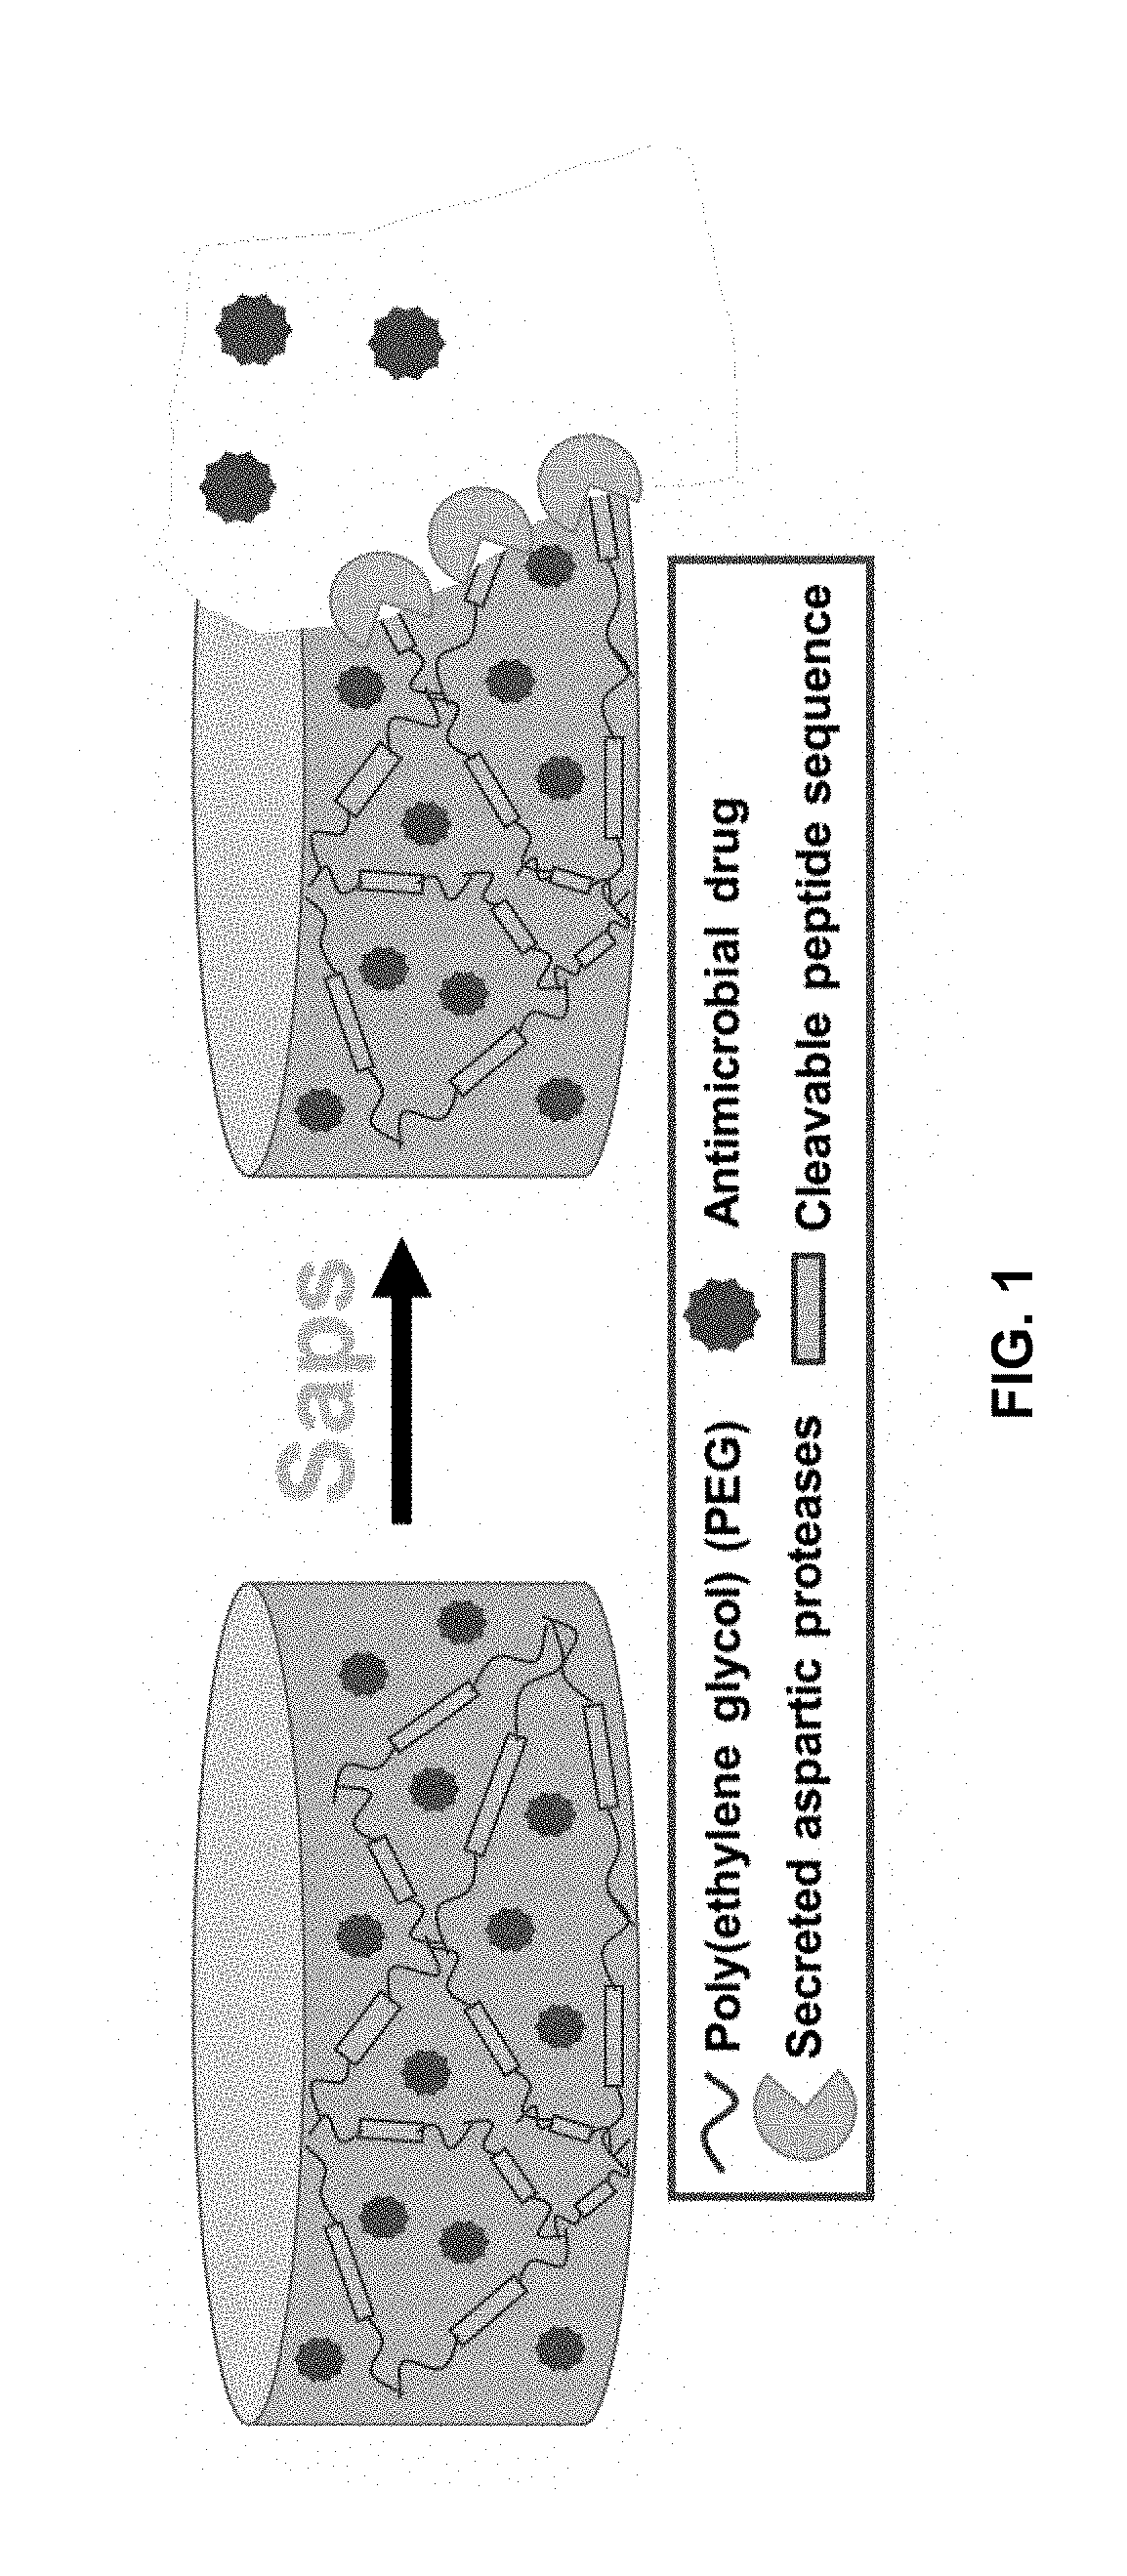 Aspartic protease-triggered antifungal hydrogels